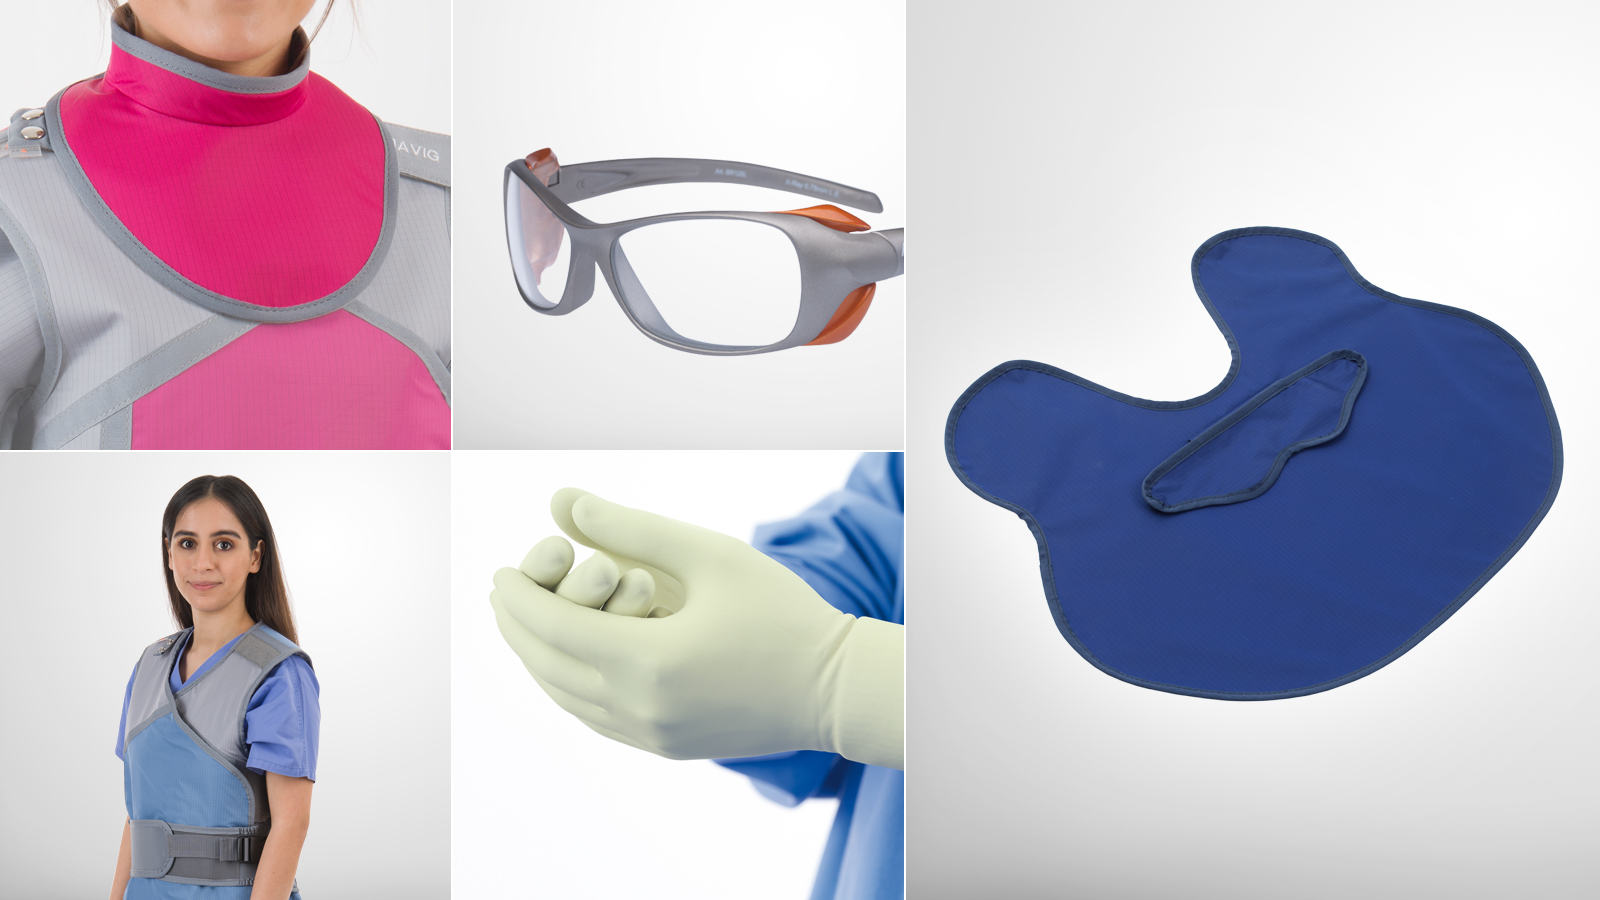 MAVIG X-Ray Protective Clothing & Accessories - Made in Germany